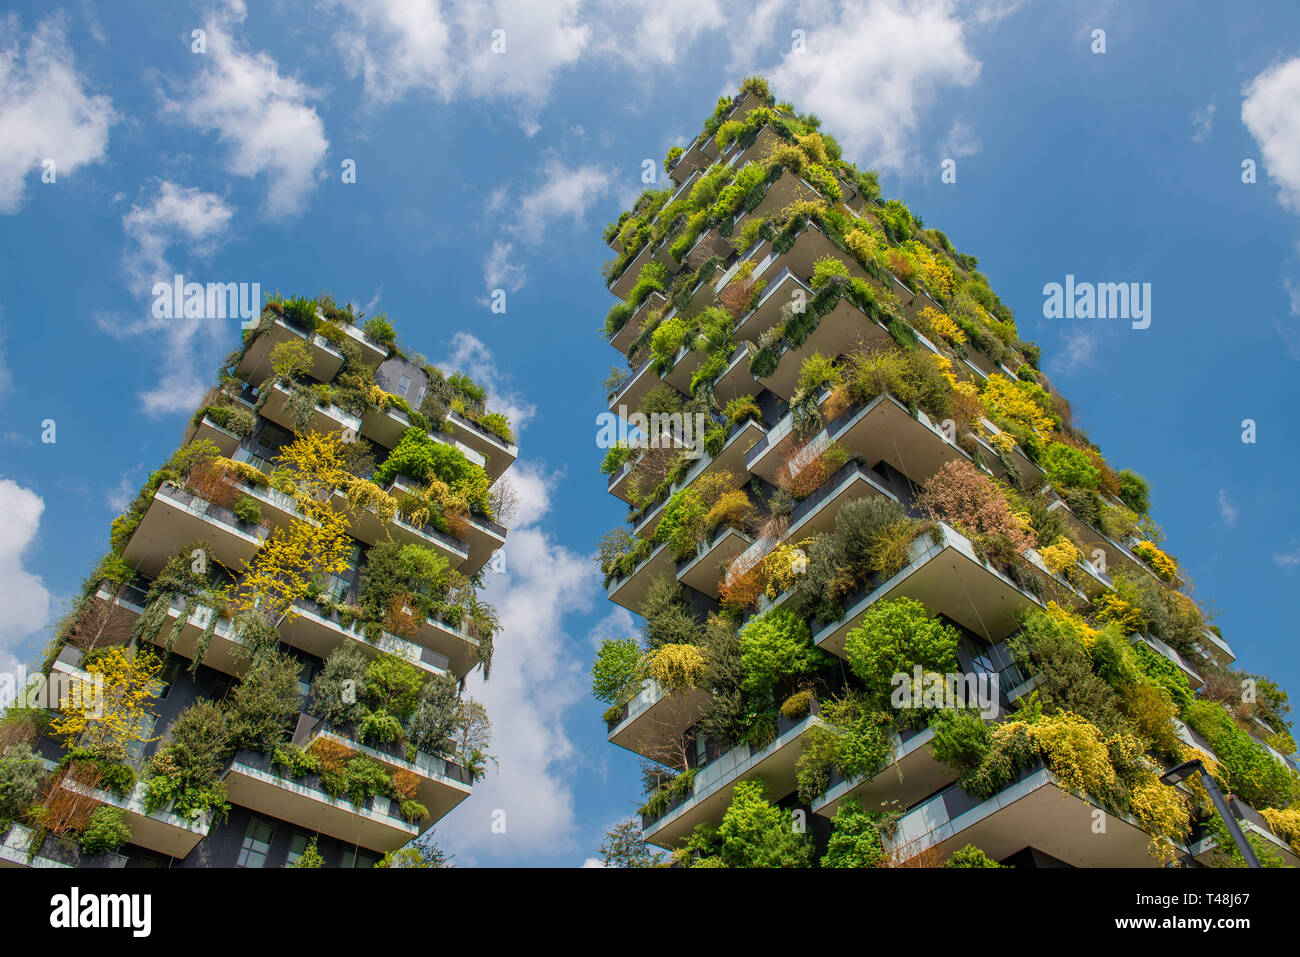 Milan Italy 10 April 2019 Houses With Garden On The Terrace Stock Photo Alamy